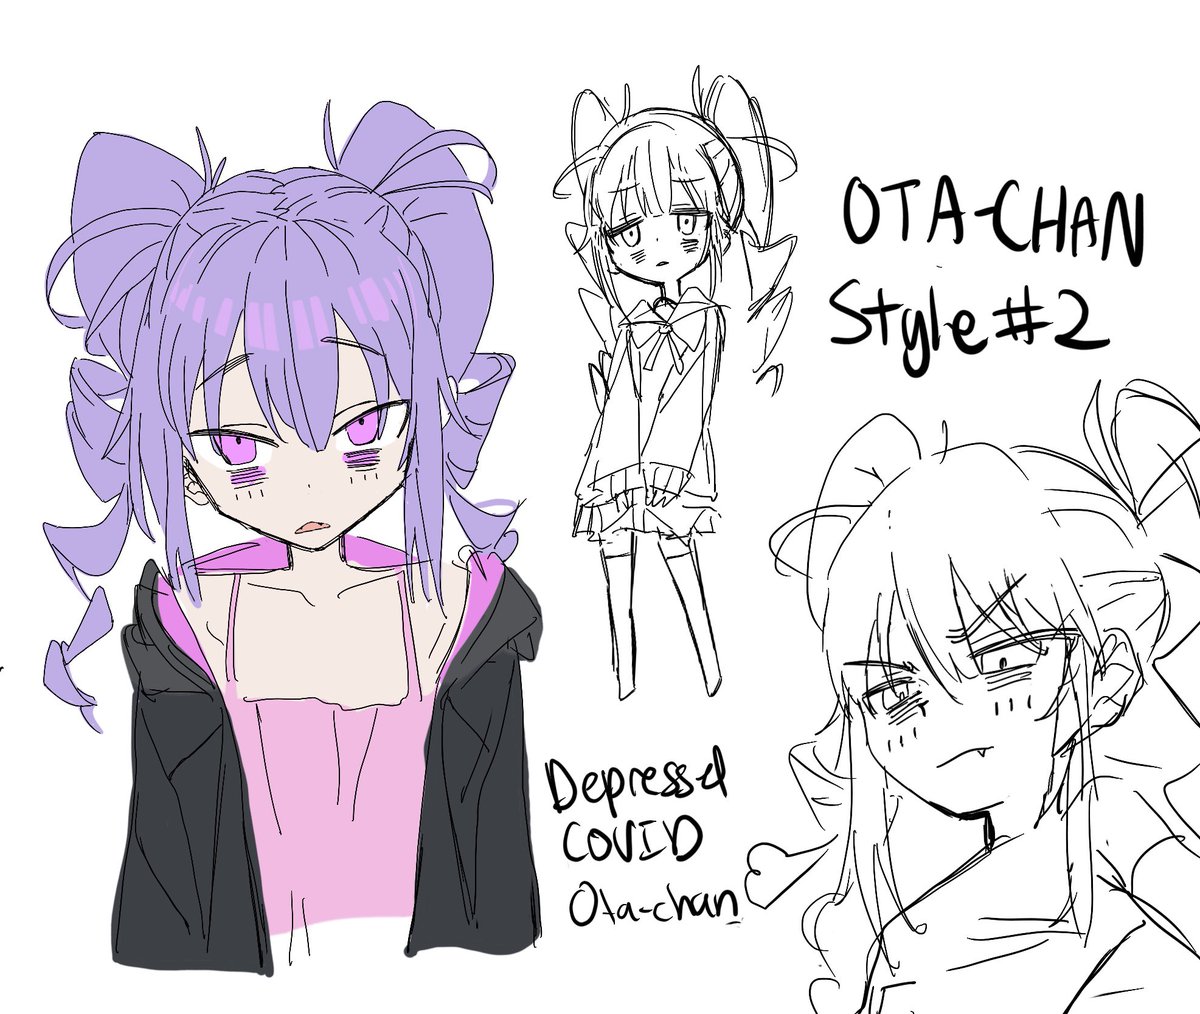 More concept sketches for ota-chan 

#イラスト #anime 